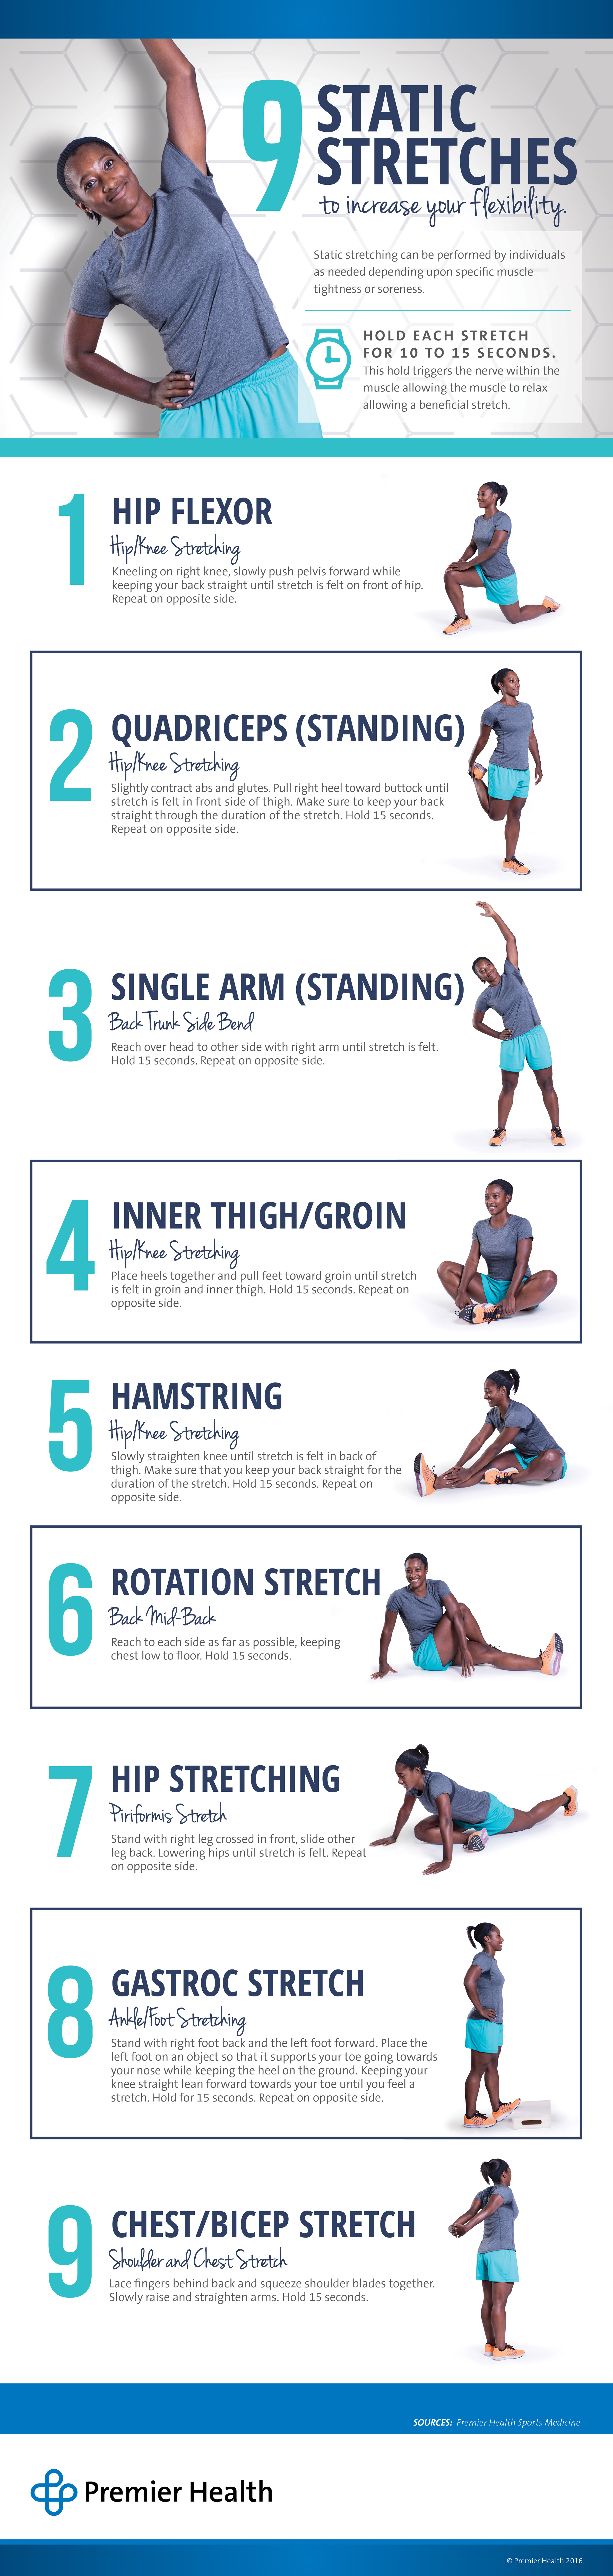 9 Static Stretches to Increase Your Flexibility